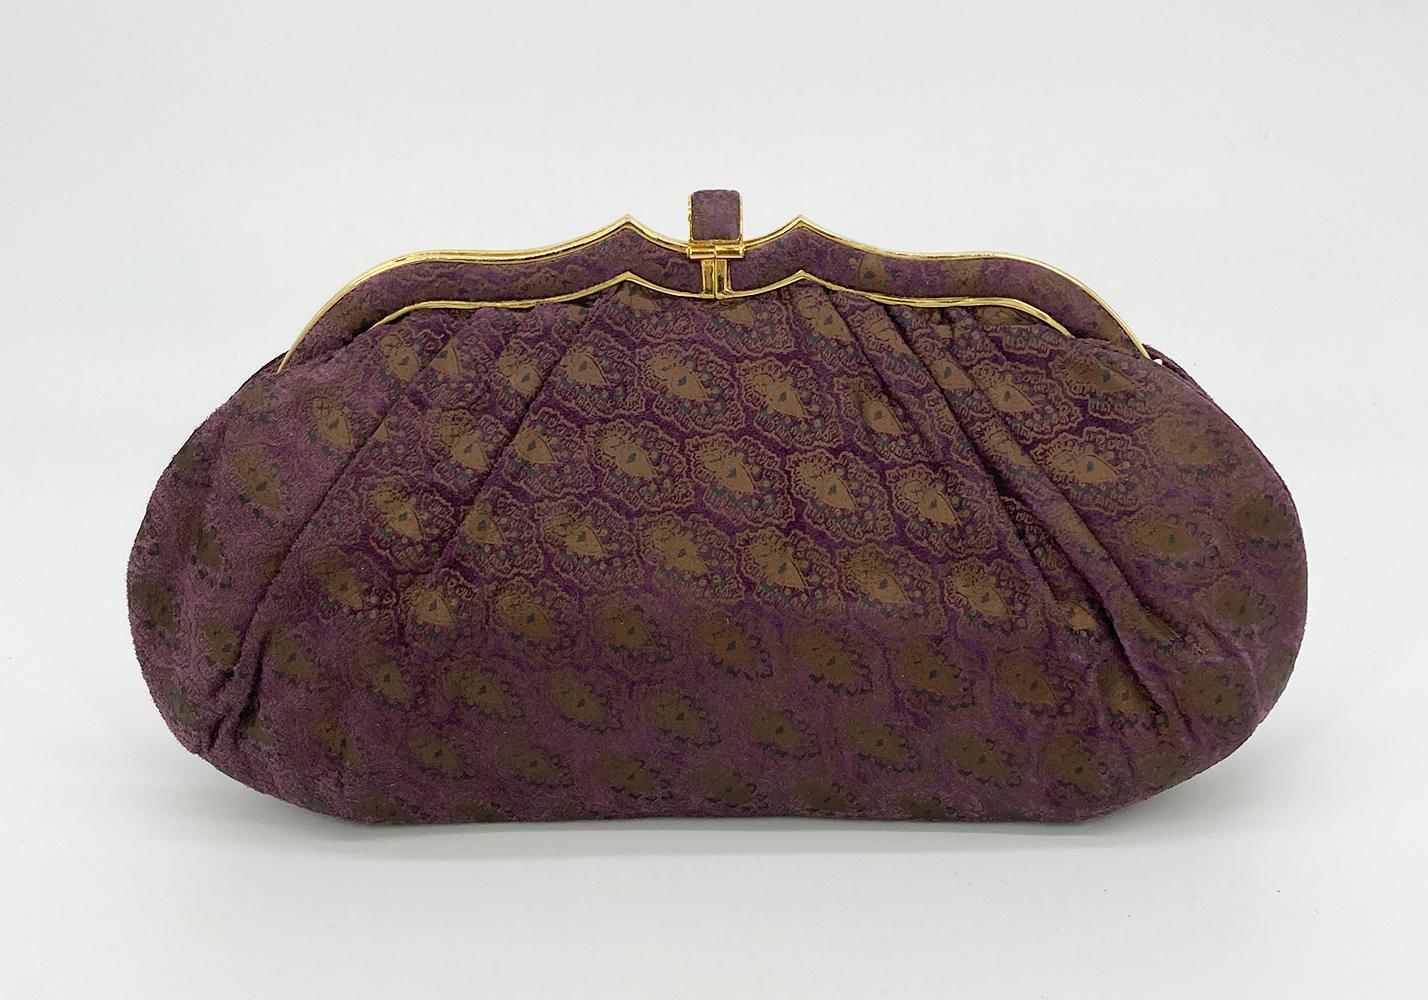 Judith Leiber Purple Embossed Suede Clutch in very good vintage condition. Purple suede exterior with unique gold and teal embossed print throughout and trimmed with gold hardware. Top lift latch closure opens to a purple nylon interior with one zip